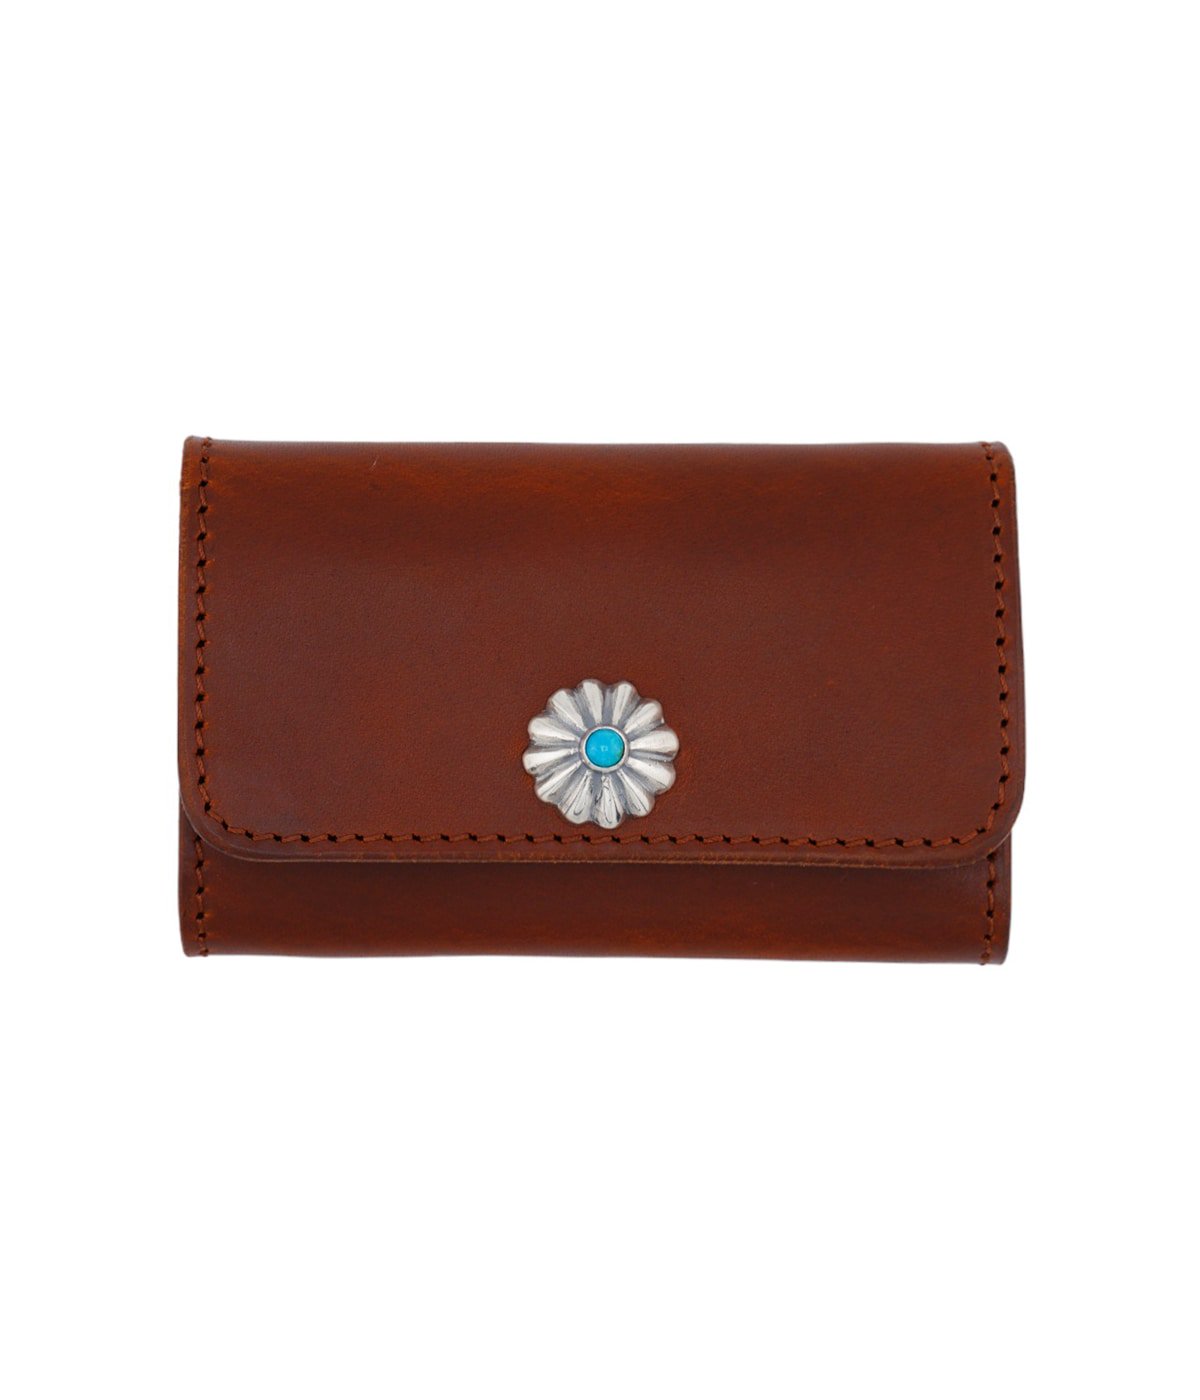 CLASSIC CARD CASE No.2 (TURQUOISE SHELL)